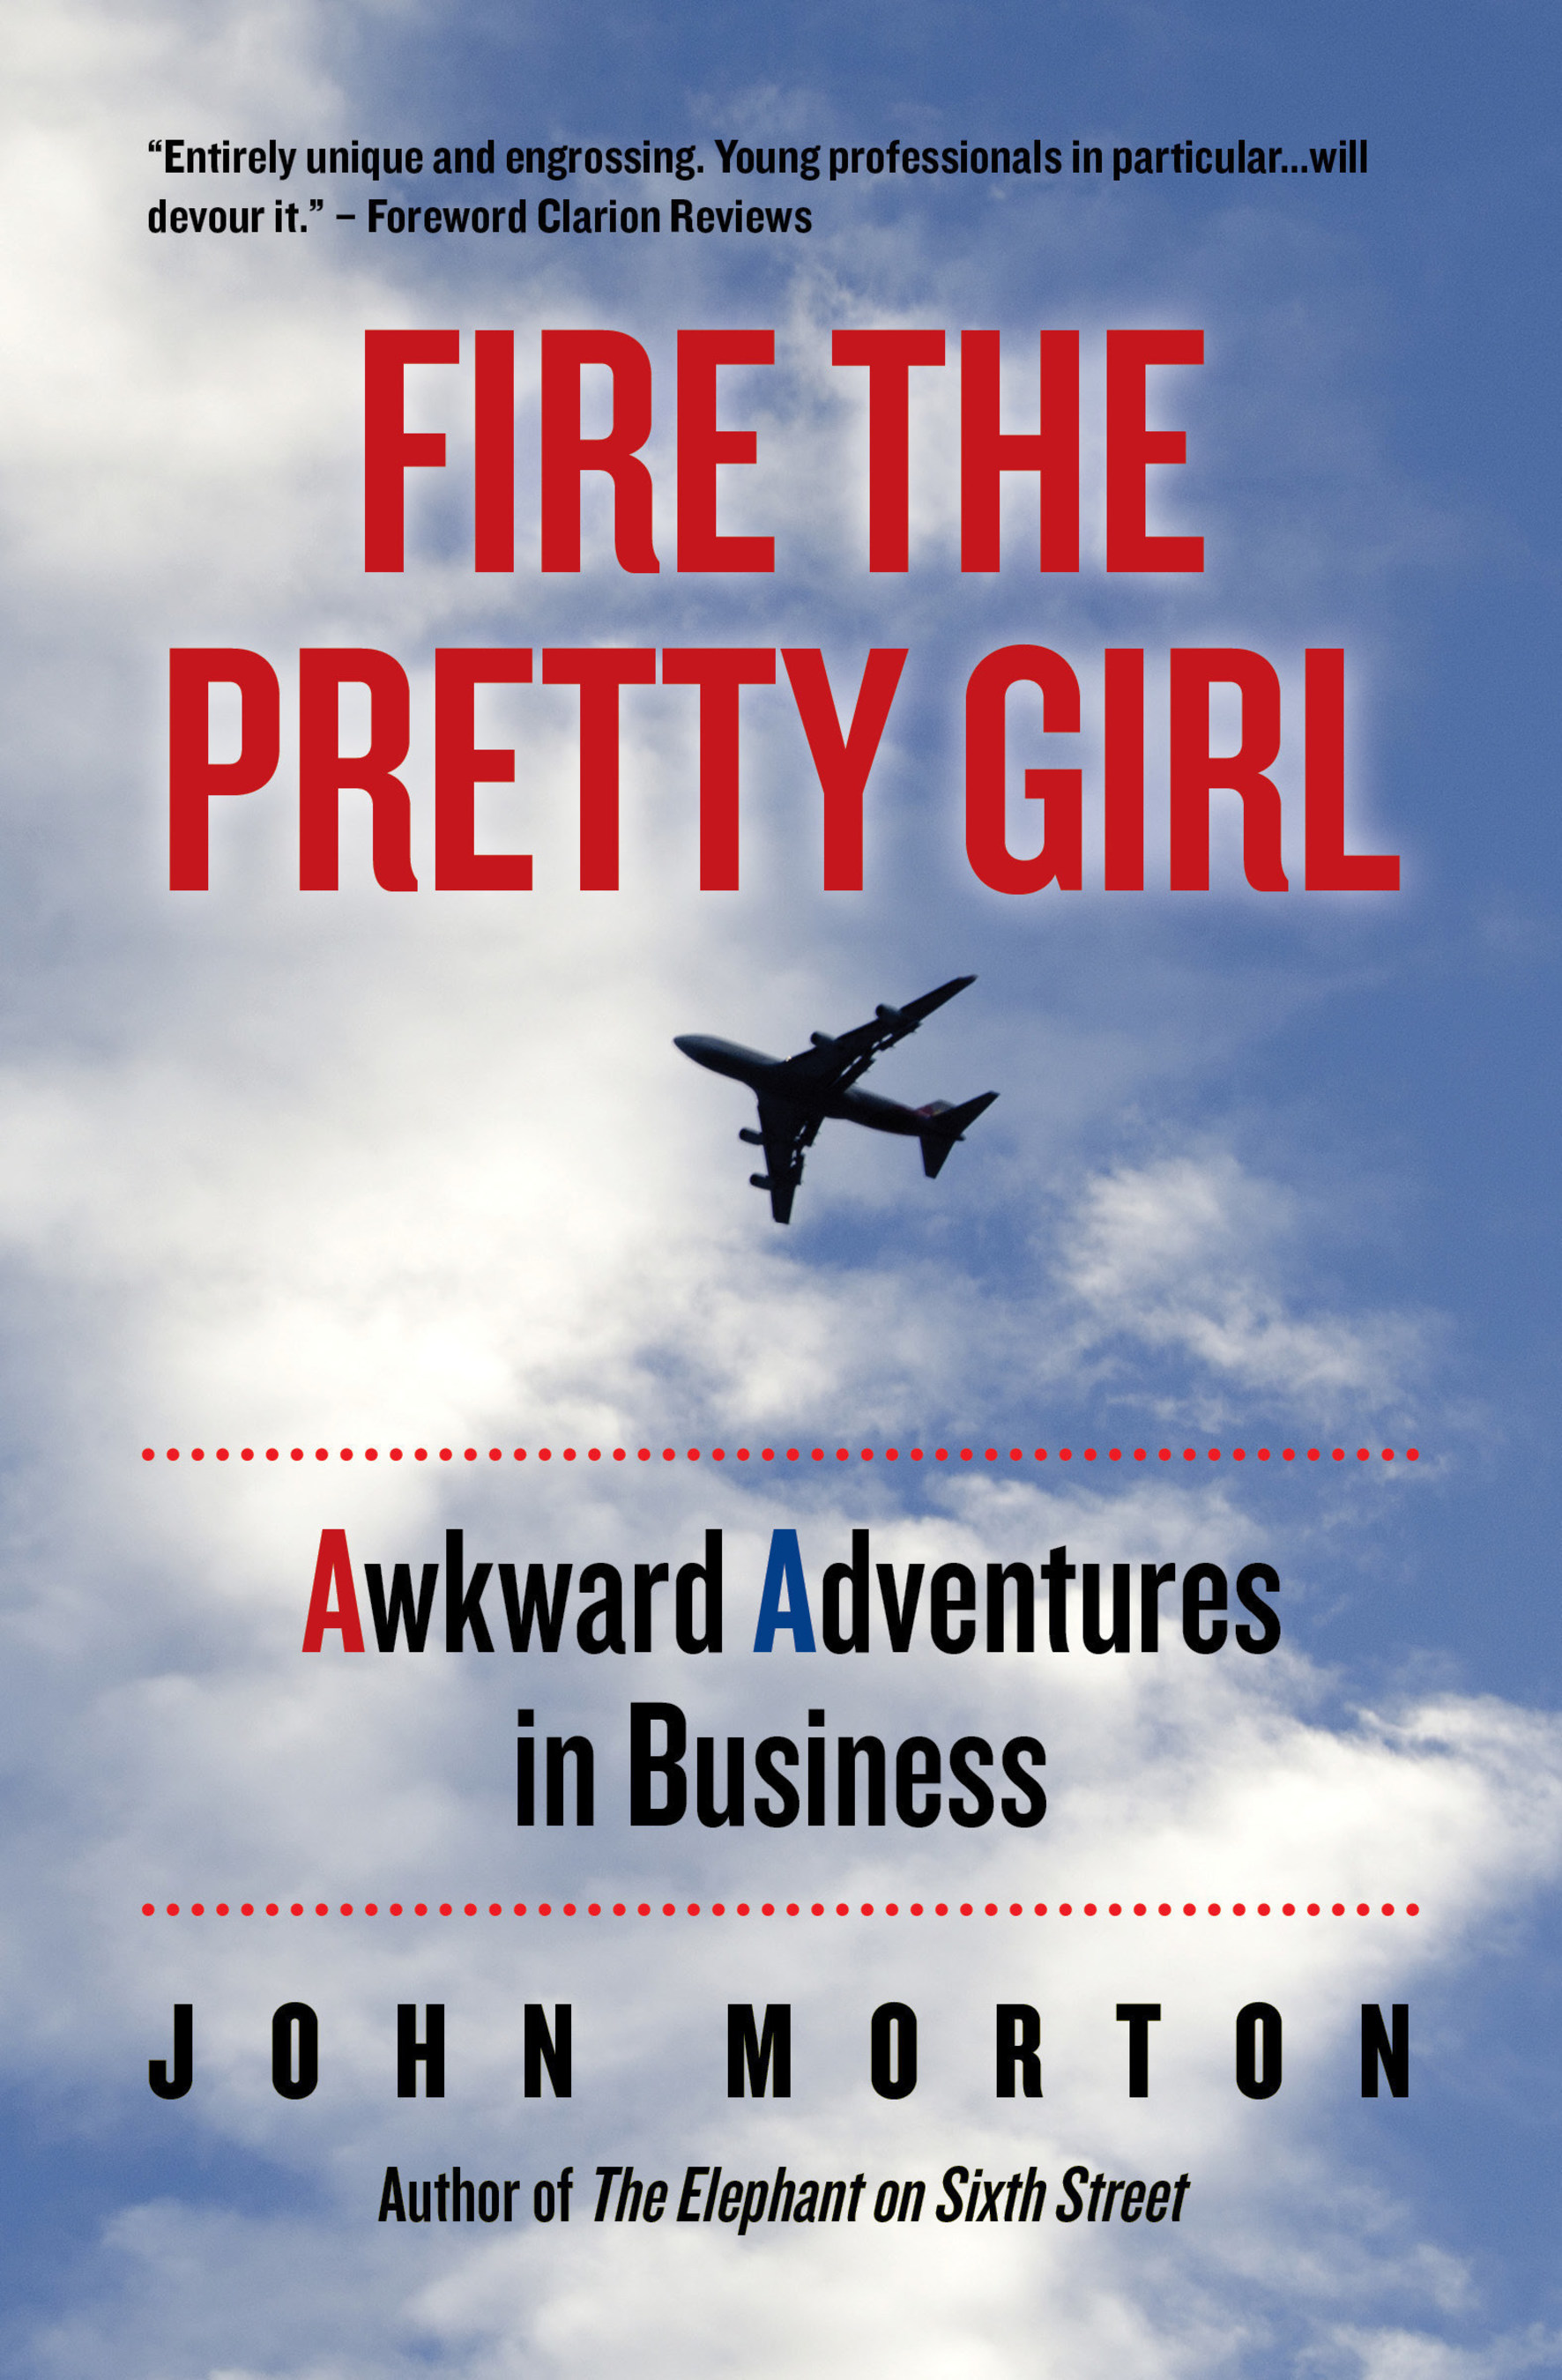 Fire The Pretty Girl, Awkward Adventures in Business, by John Morton